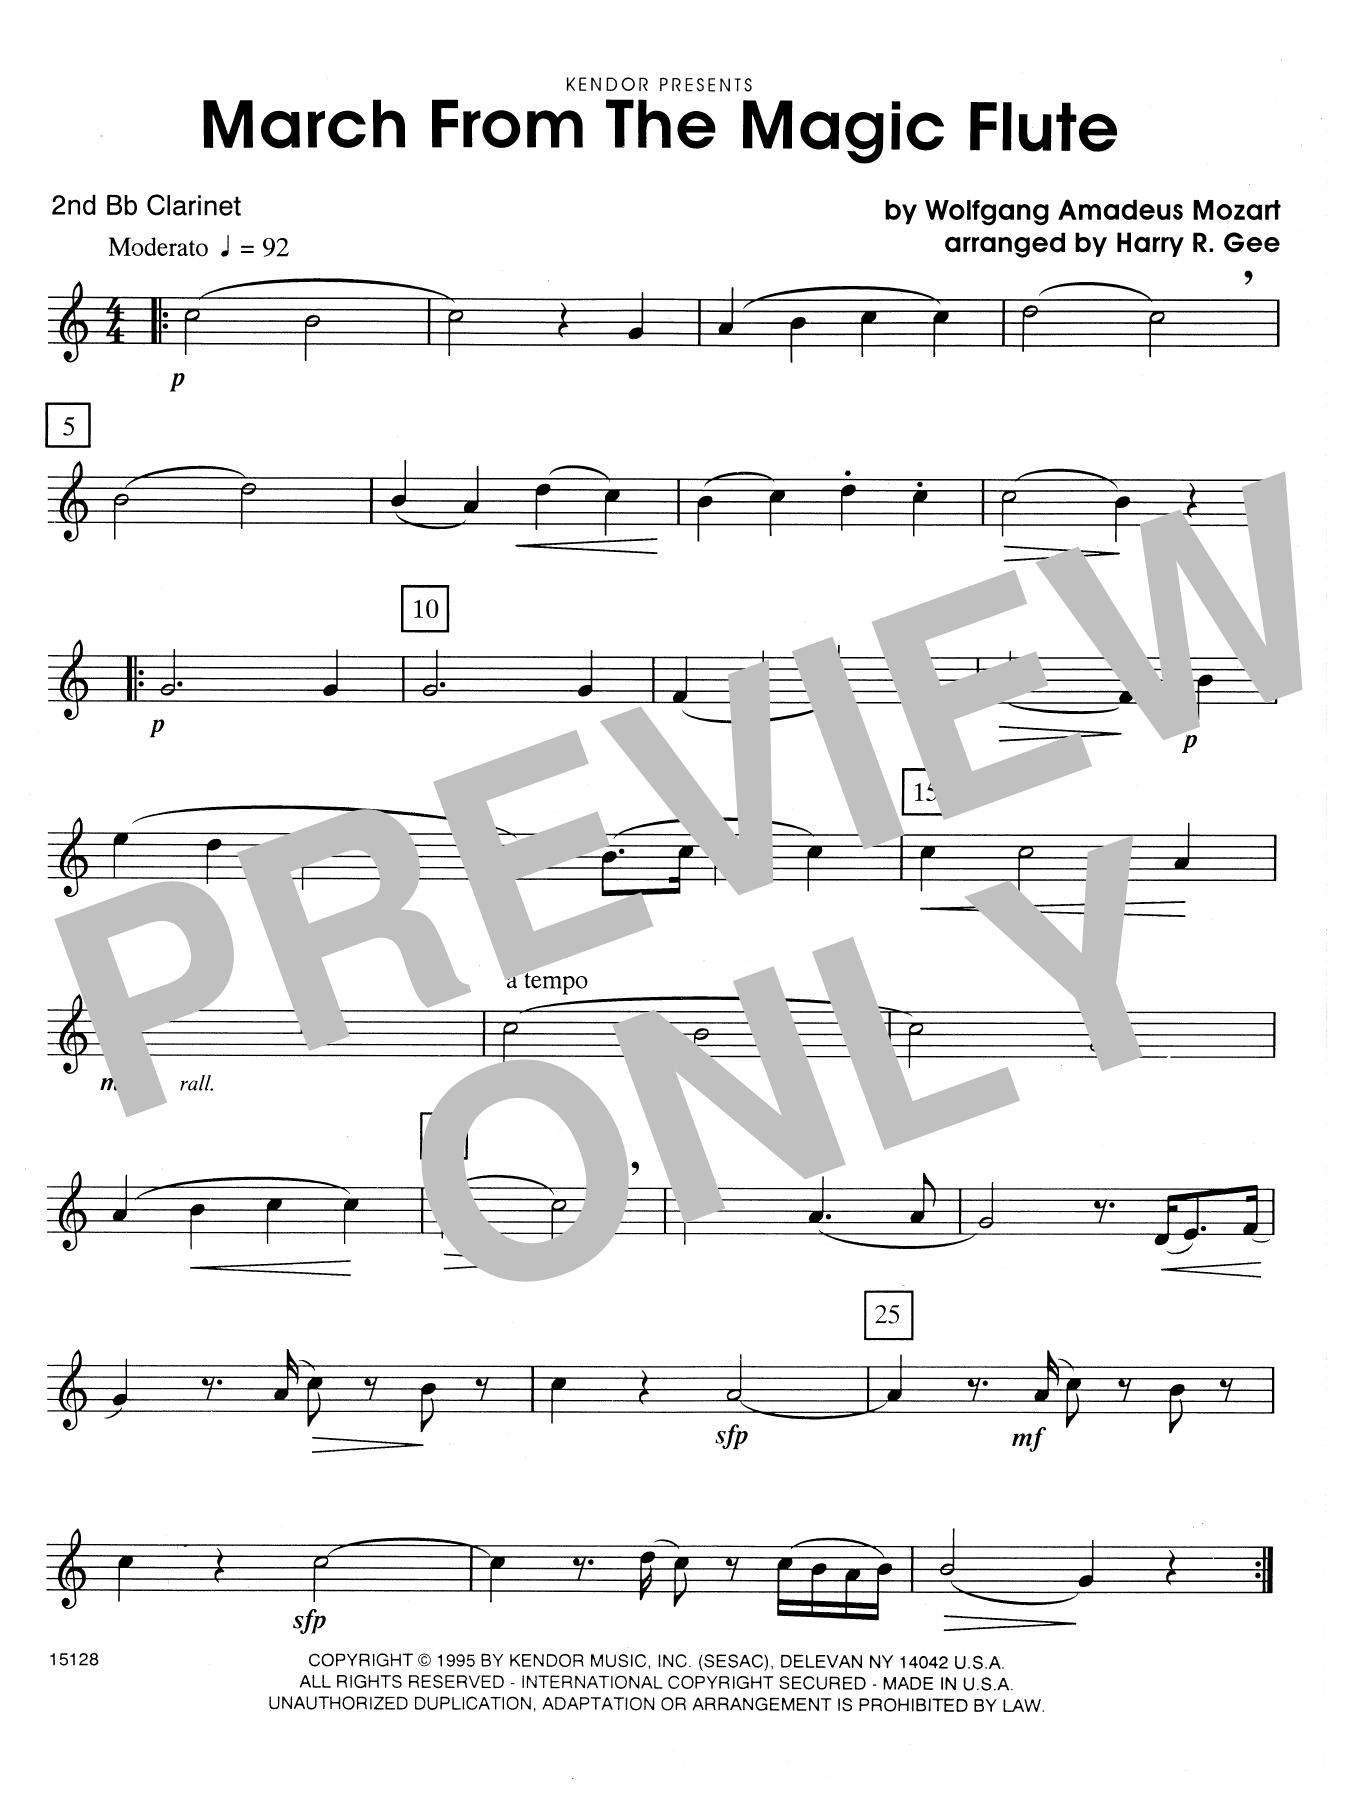 Harry R. Gee March From The Magic Flute - 2nd Bb Clarinet sheet music notes and chords. Download Printable PDF.